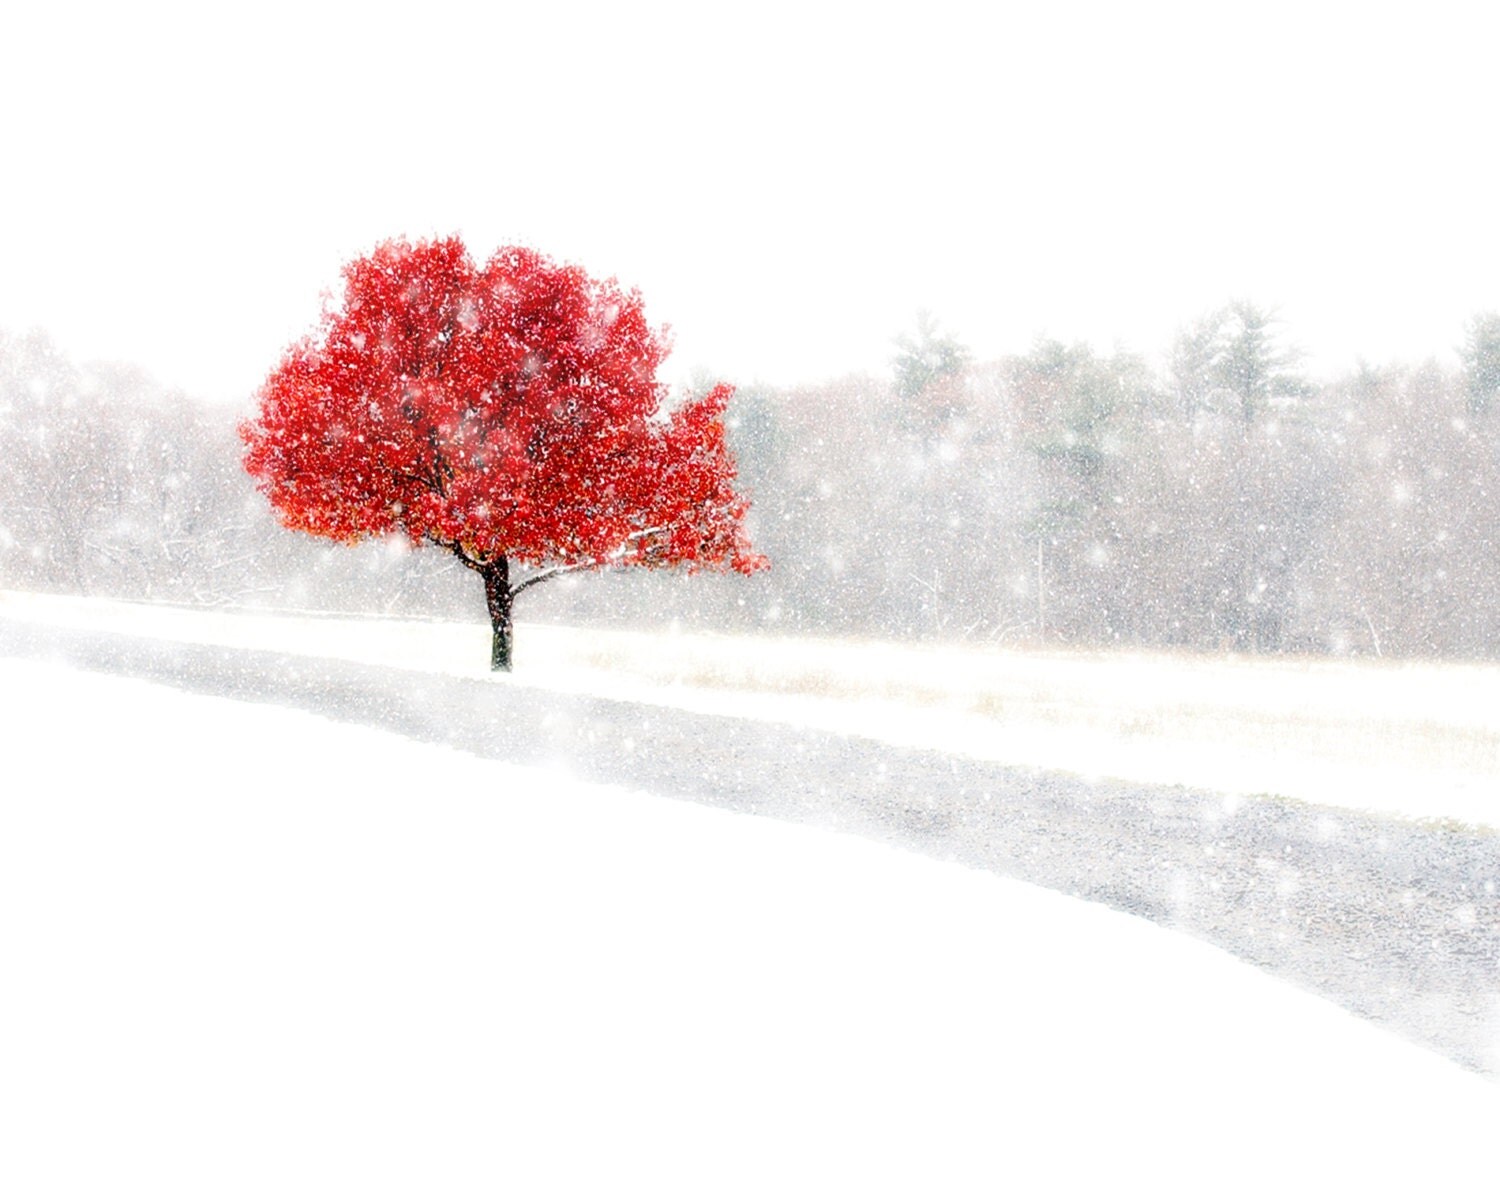 SET OF 4 Snowfall Autumn Red White Tree serene peaceful winter snow Greeting Card Note Card Blank Inside - RikkiVanCamp